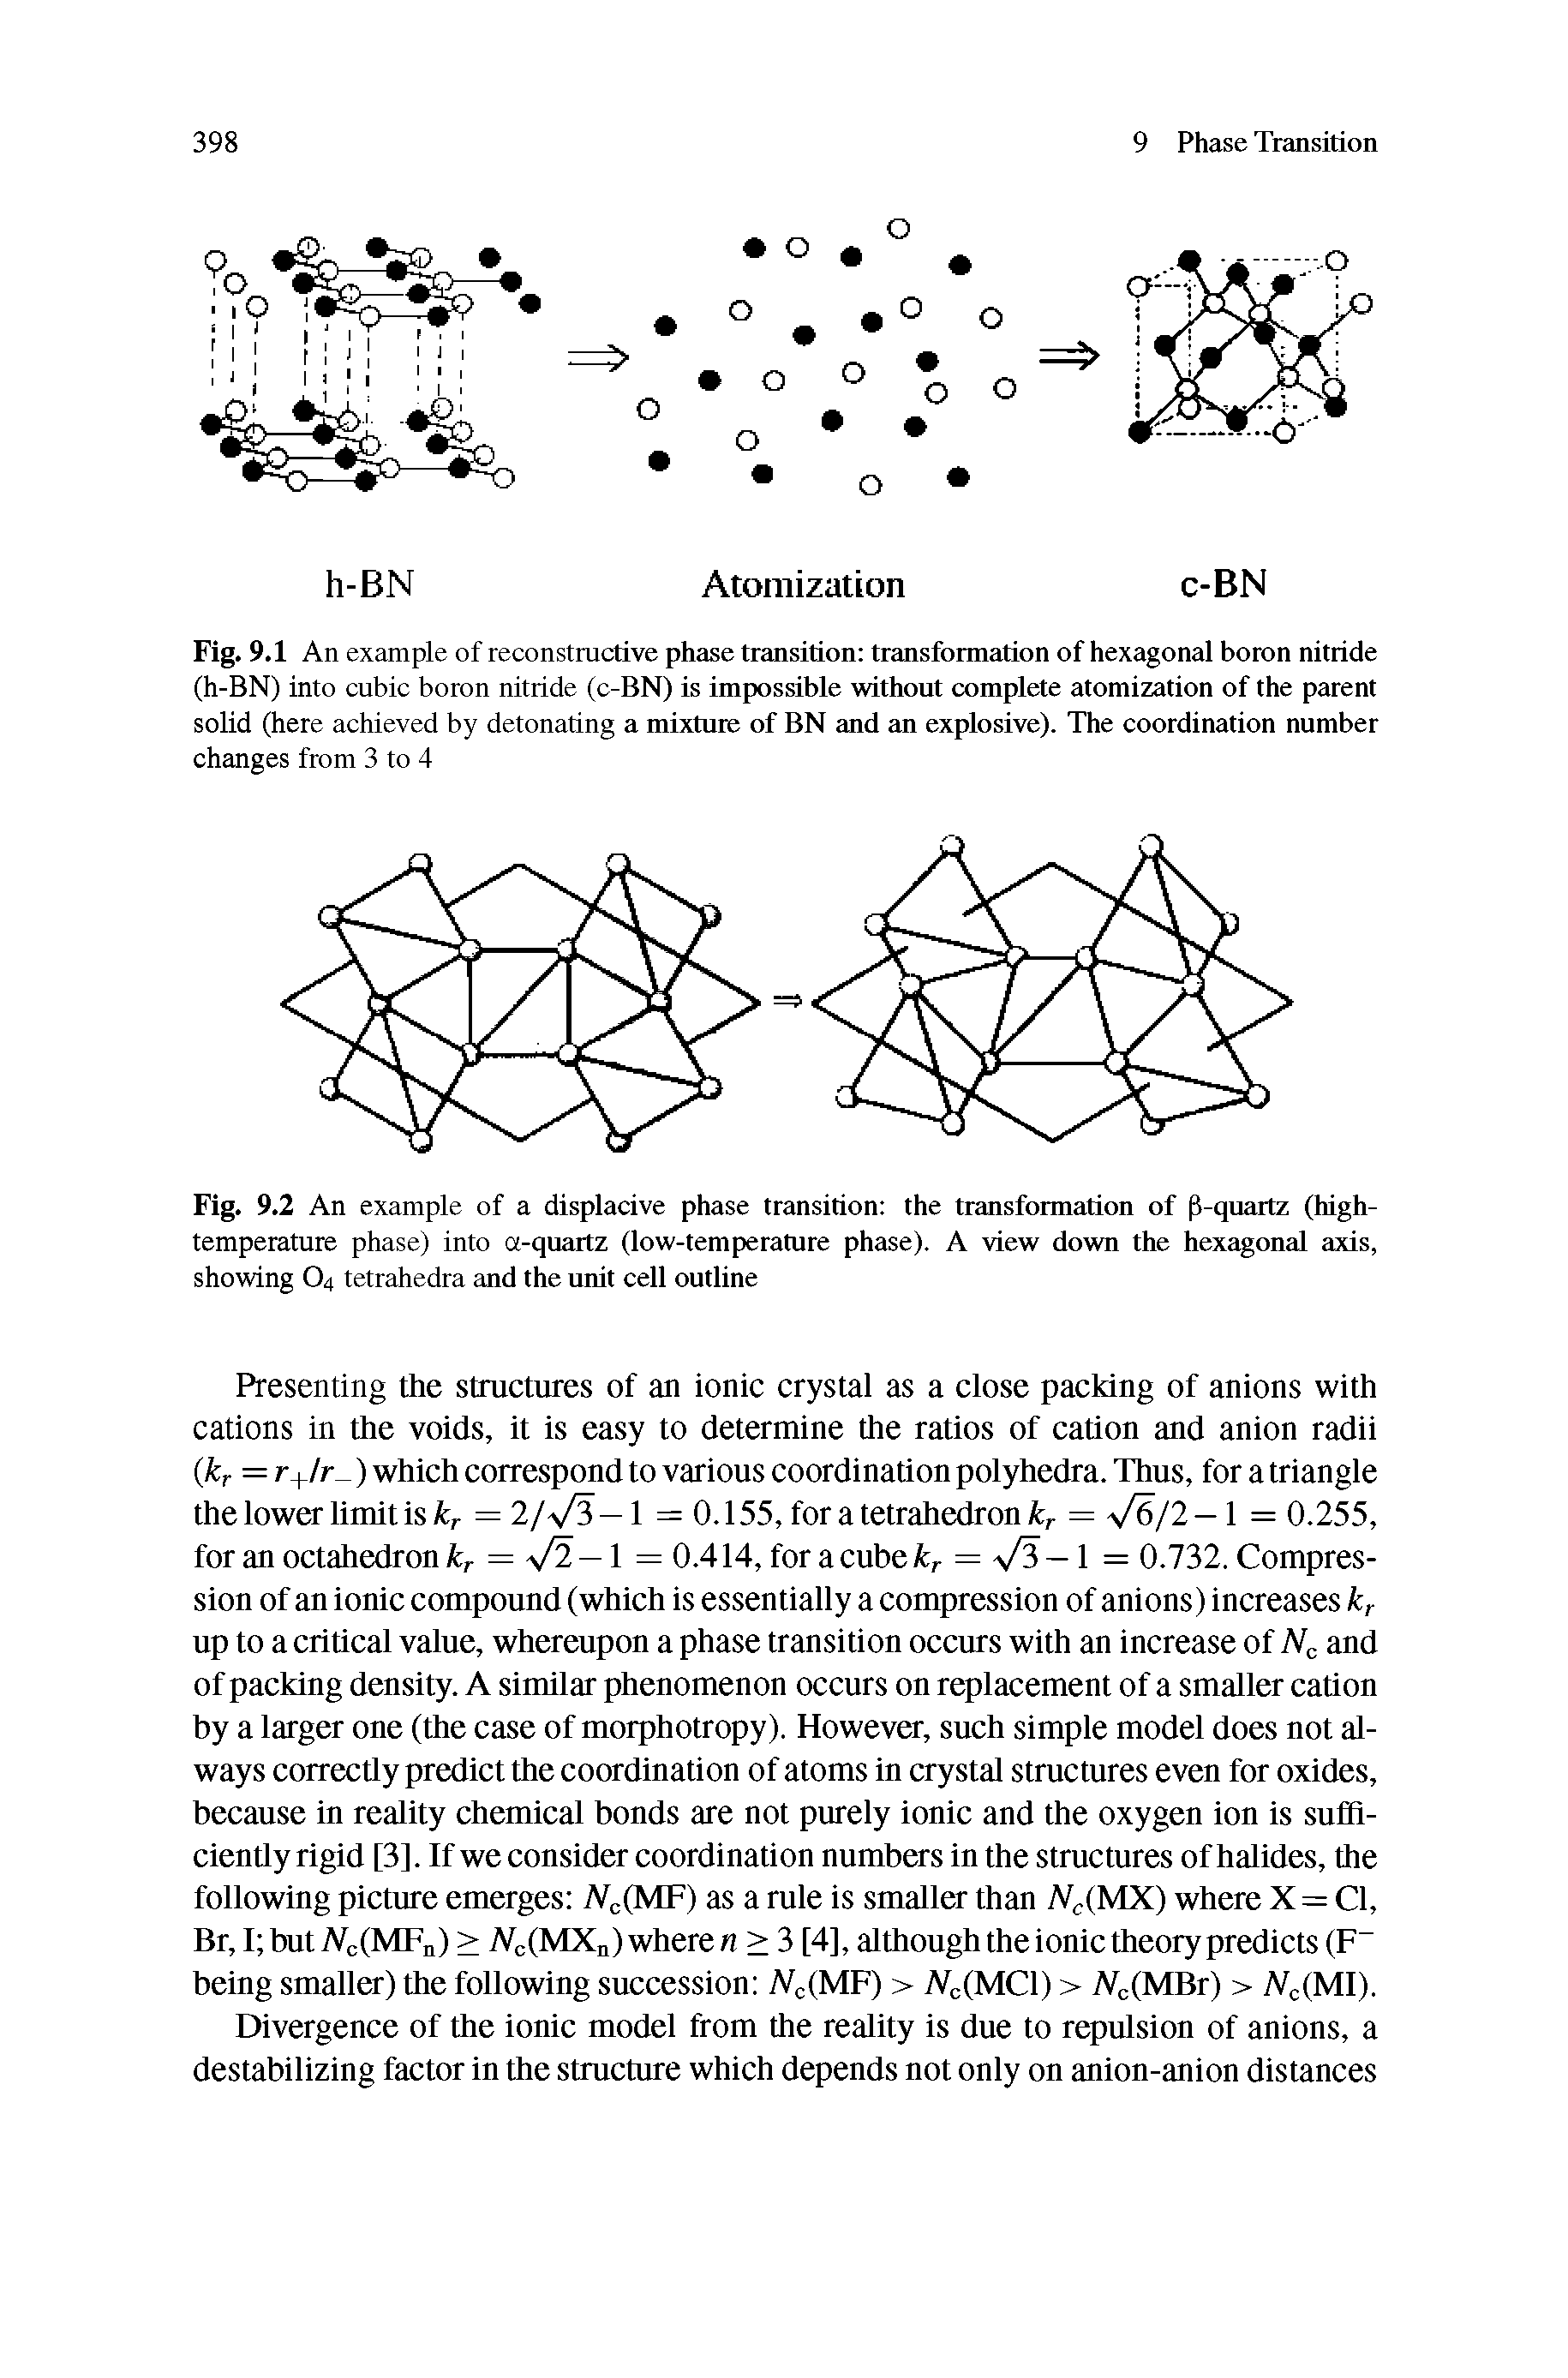 Fig. 9.1 An example of reconstructive phase transition transformation of hexagontil boron nitride (h-BN) into cubic boron nitride (c-BN) is impossible without complete atomization of the parent solid (here achieved by detonating a mixture of BN and an explosive). The coordination number changes from 3 to 4...